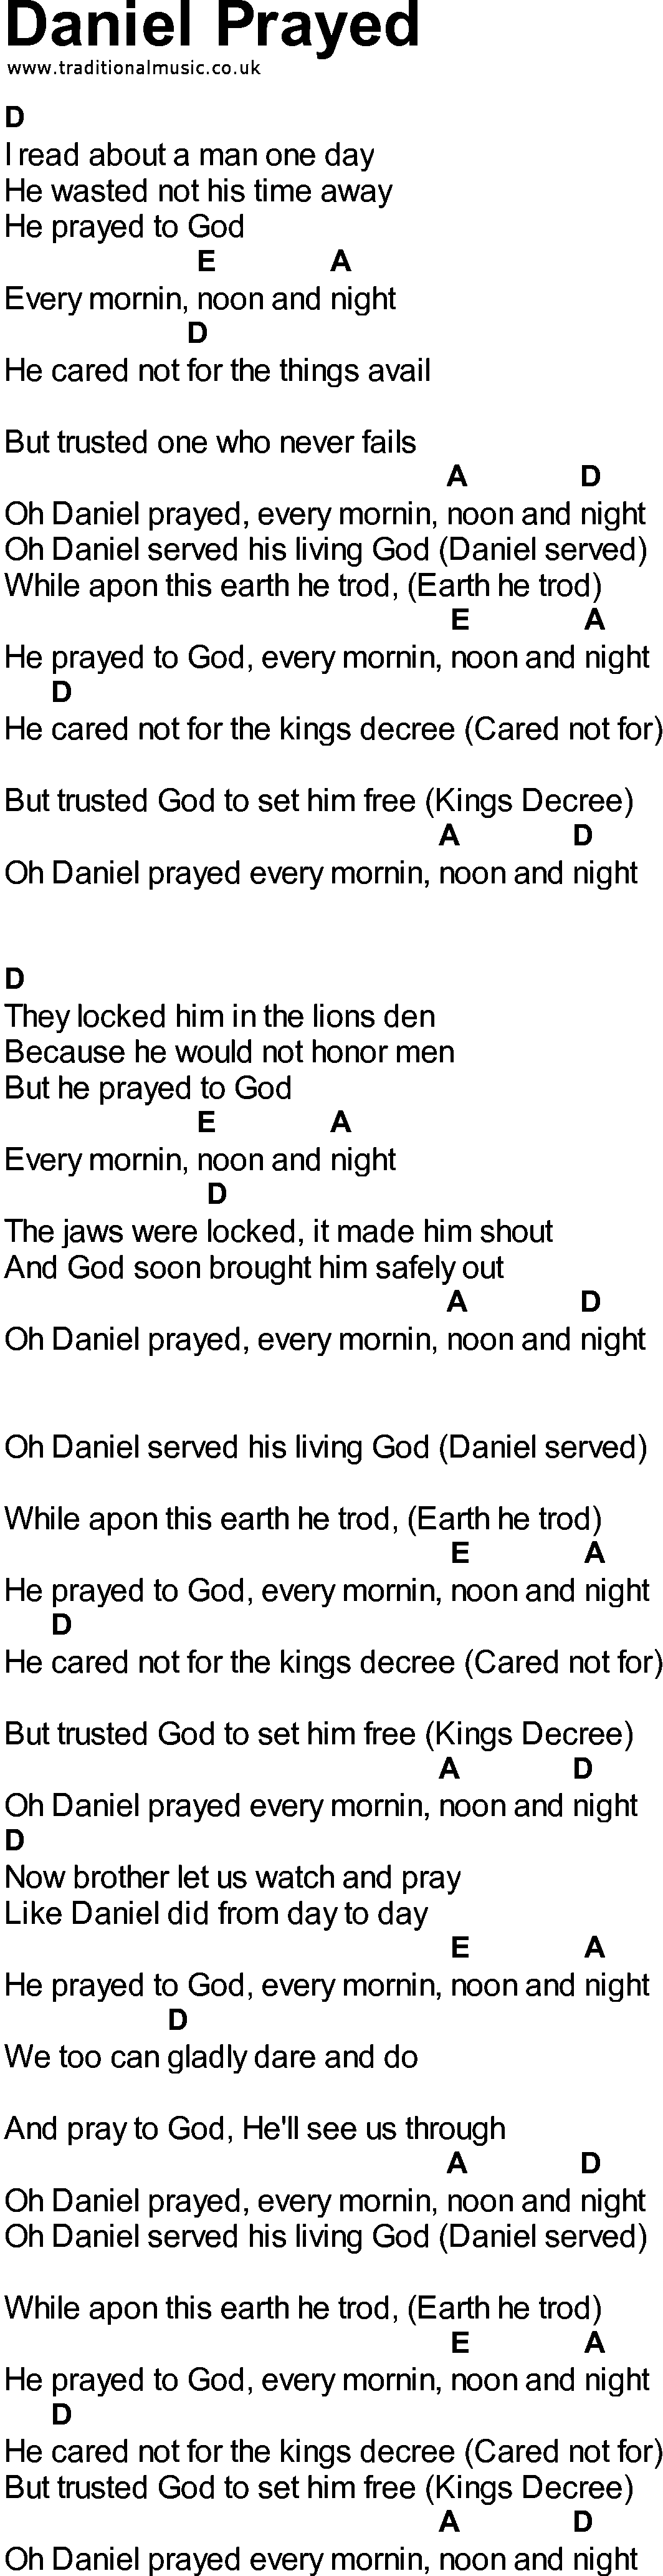 Bluegrass songs with chords - Daniel Prayed